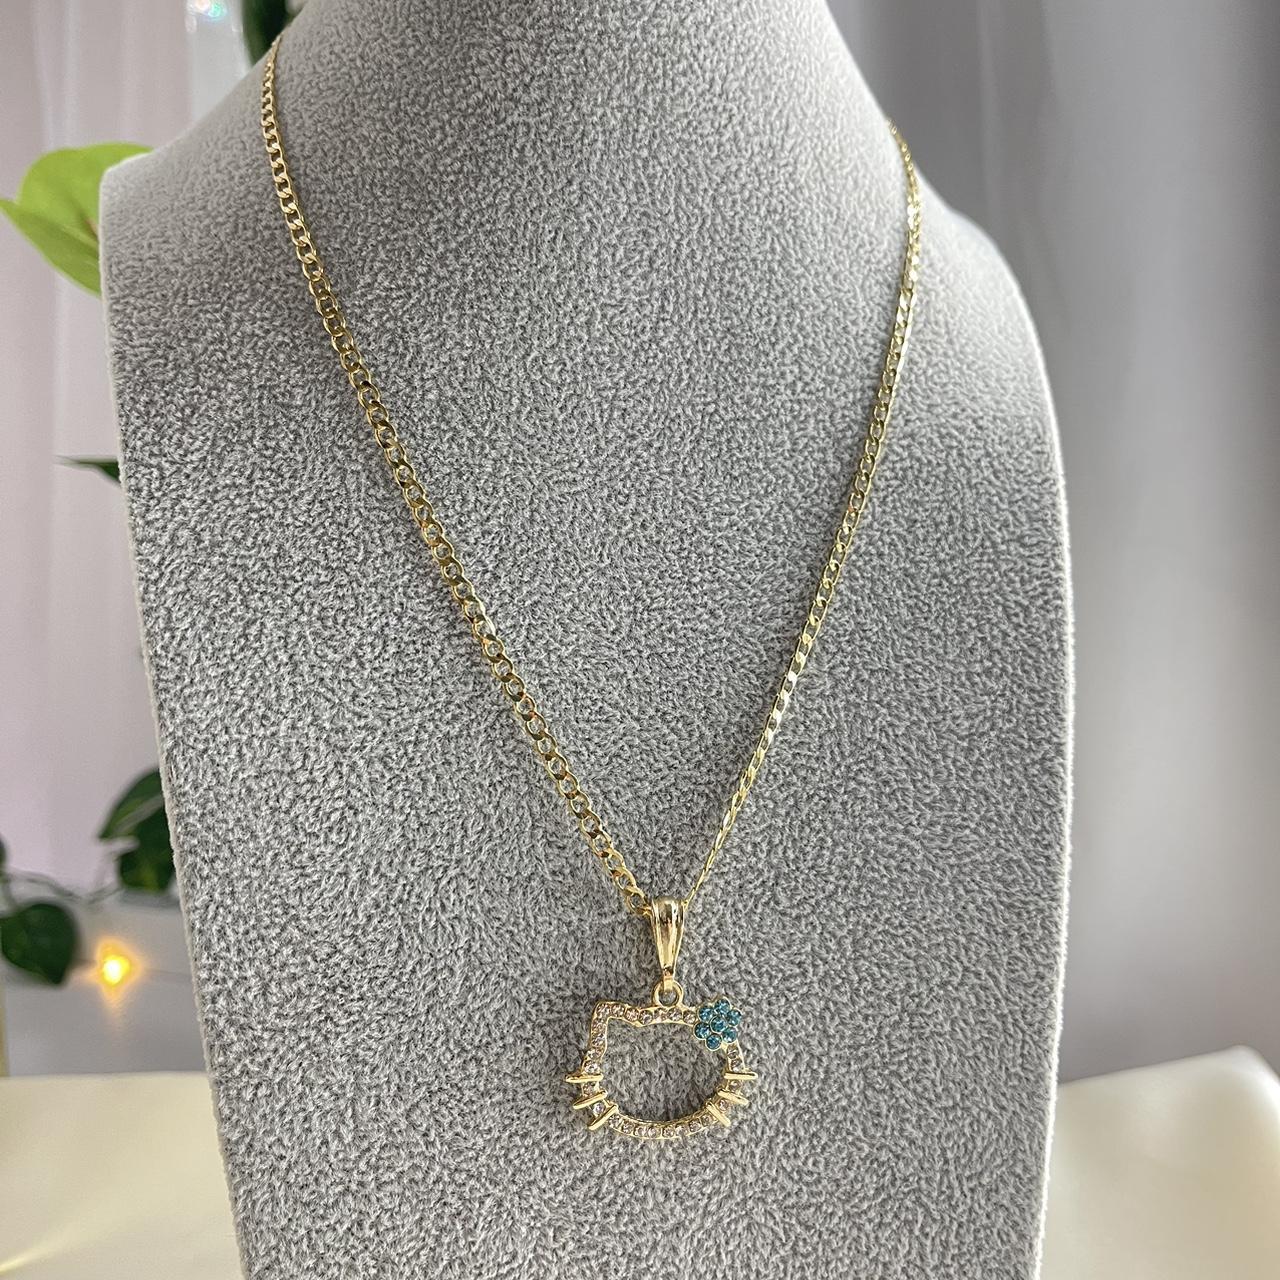 COD PAWNABLE 18k Saudi Gold Hello Kitty Necklace | Shopee Philippines